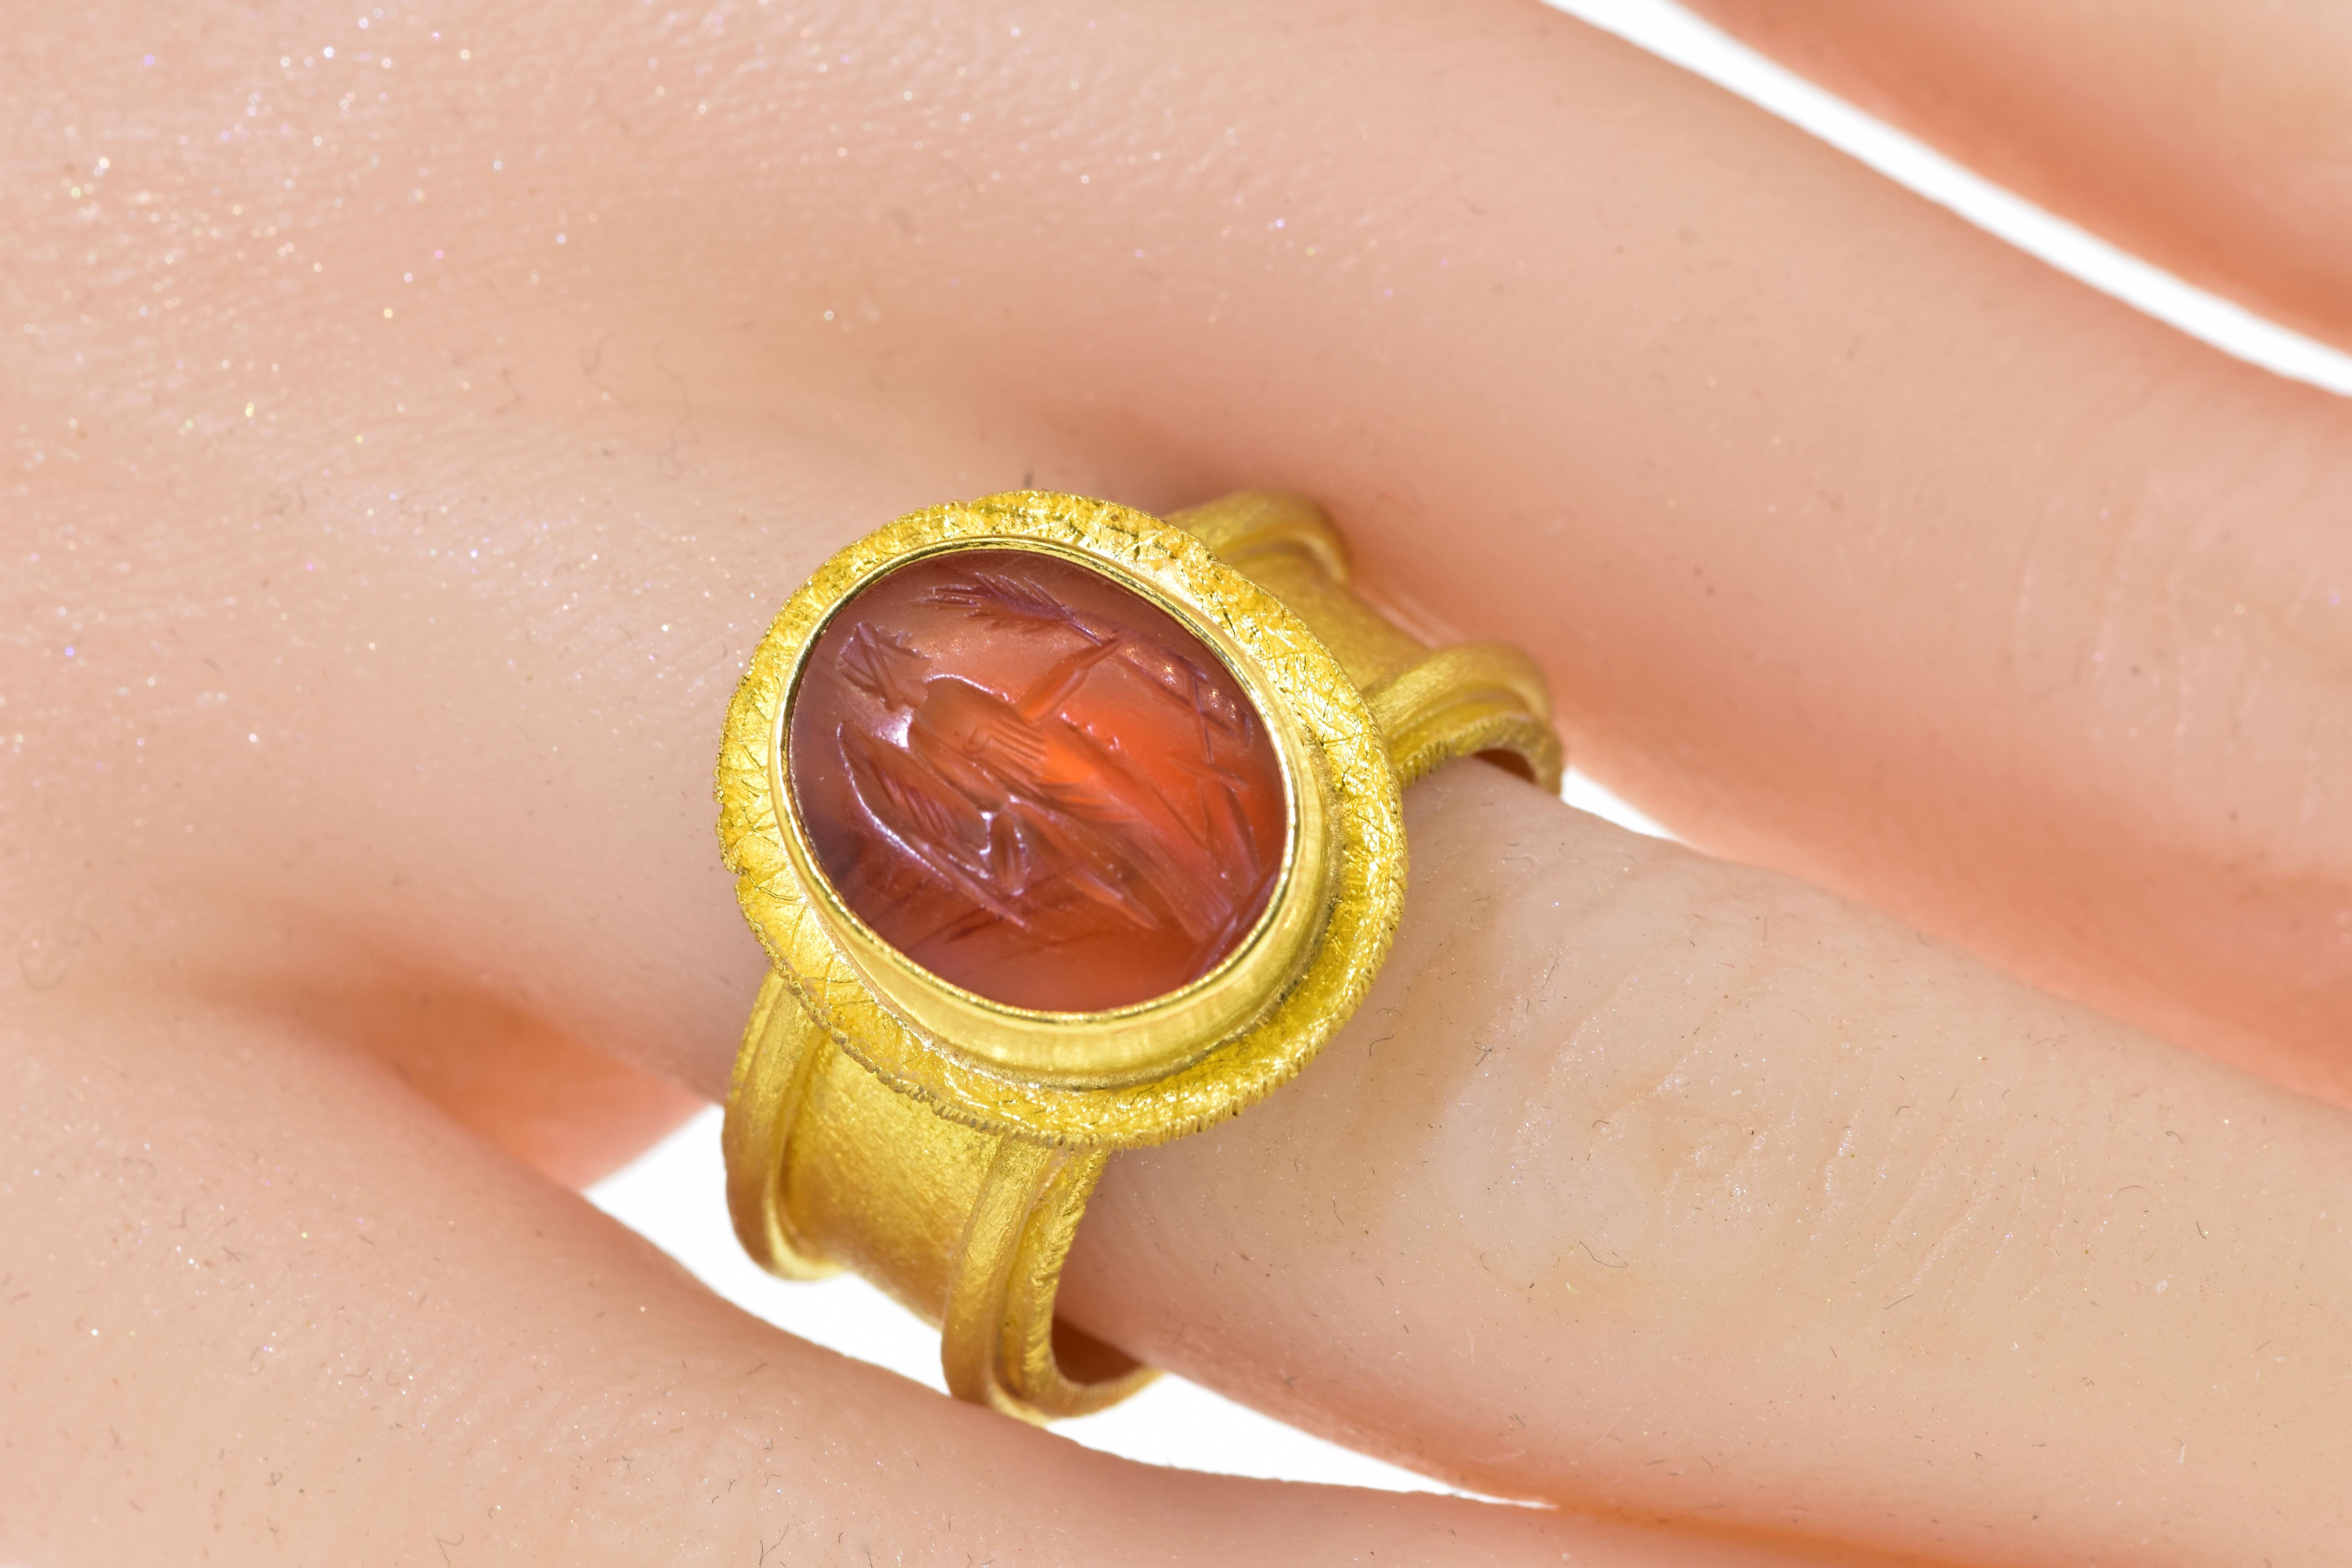 22K yellow contemporary gold ring centering an antique carnelian intaglio, c. 1850, of a standing angel extending an olive branch - signifying peace. The intaglio is in fine condition, measures 14.4 mm by 11.5 mm.  and remounted in this contemporary